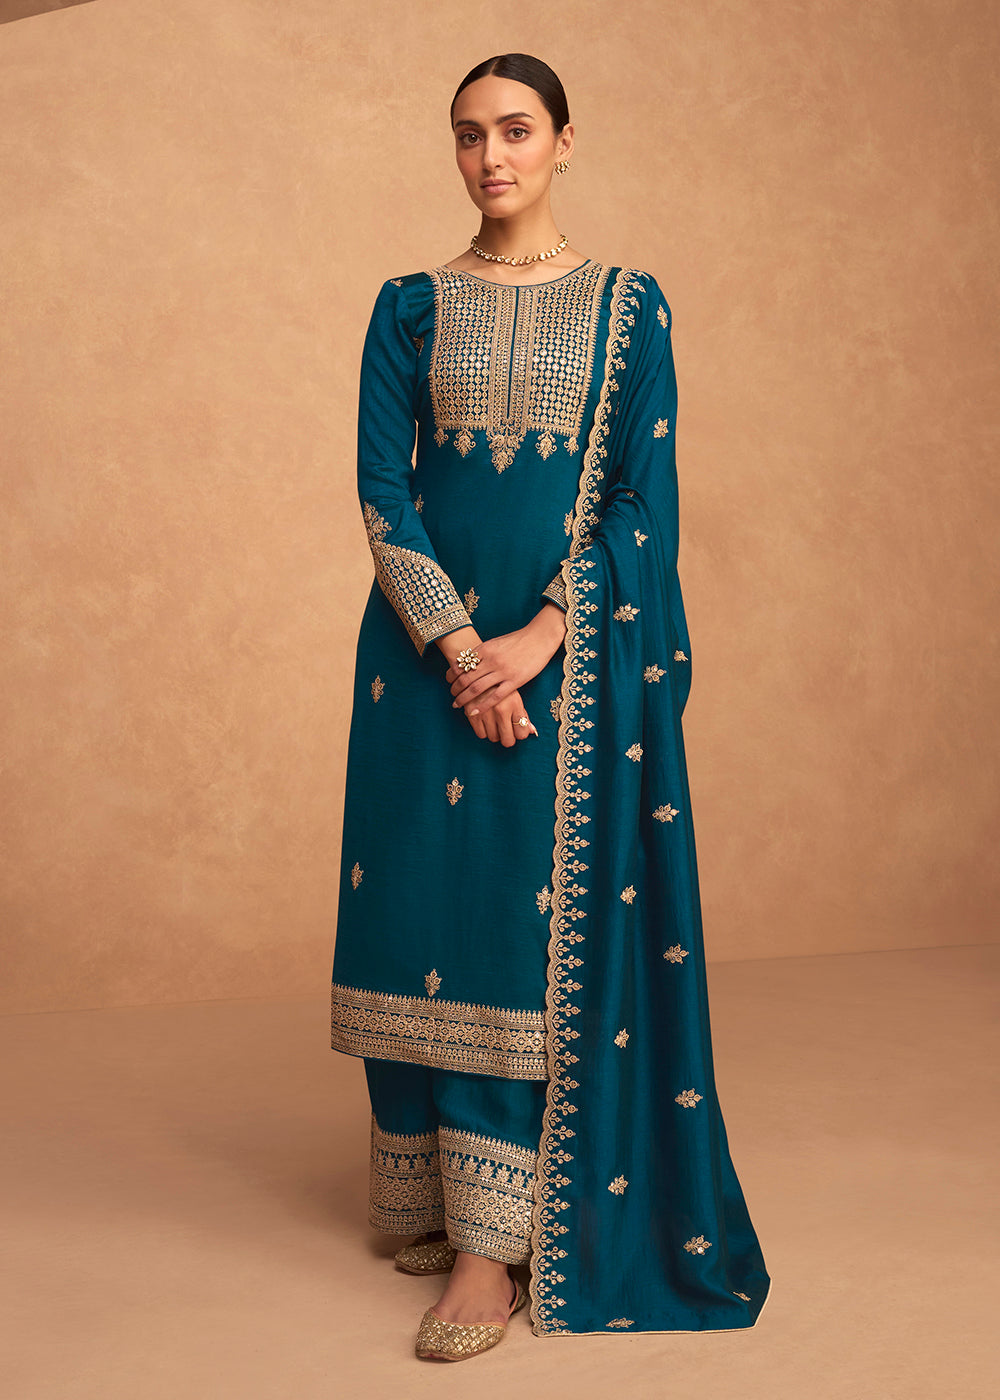 Buy Now Pretty Teal Blue Premium Silk Embroidered Indian Palazzo Salwar Suit Online in USA, UK, Canada, Germany & Worldwide at Empress Clothing.